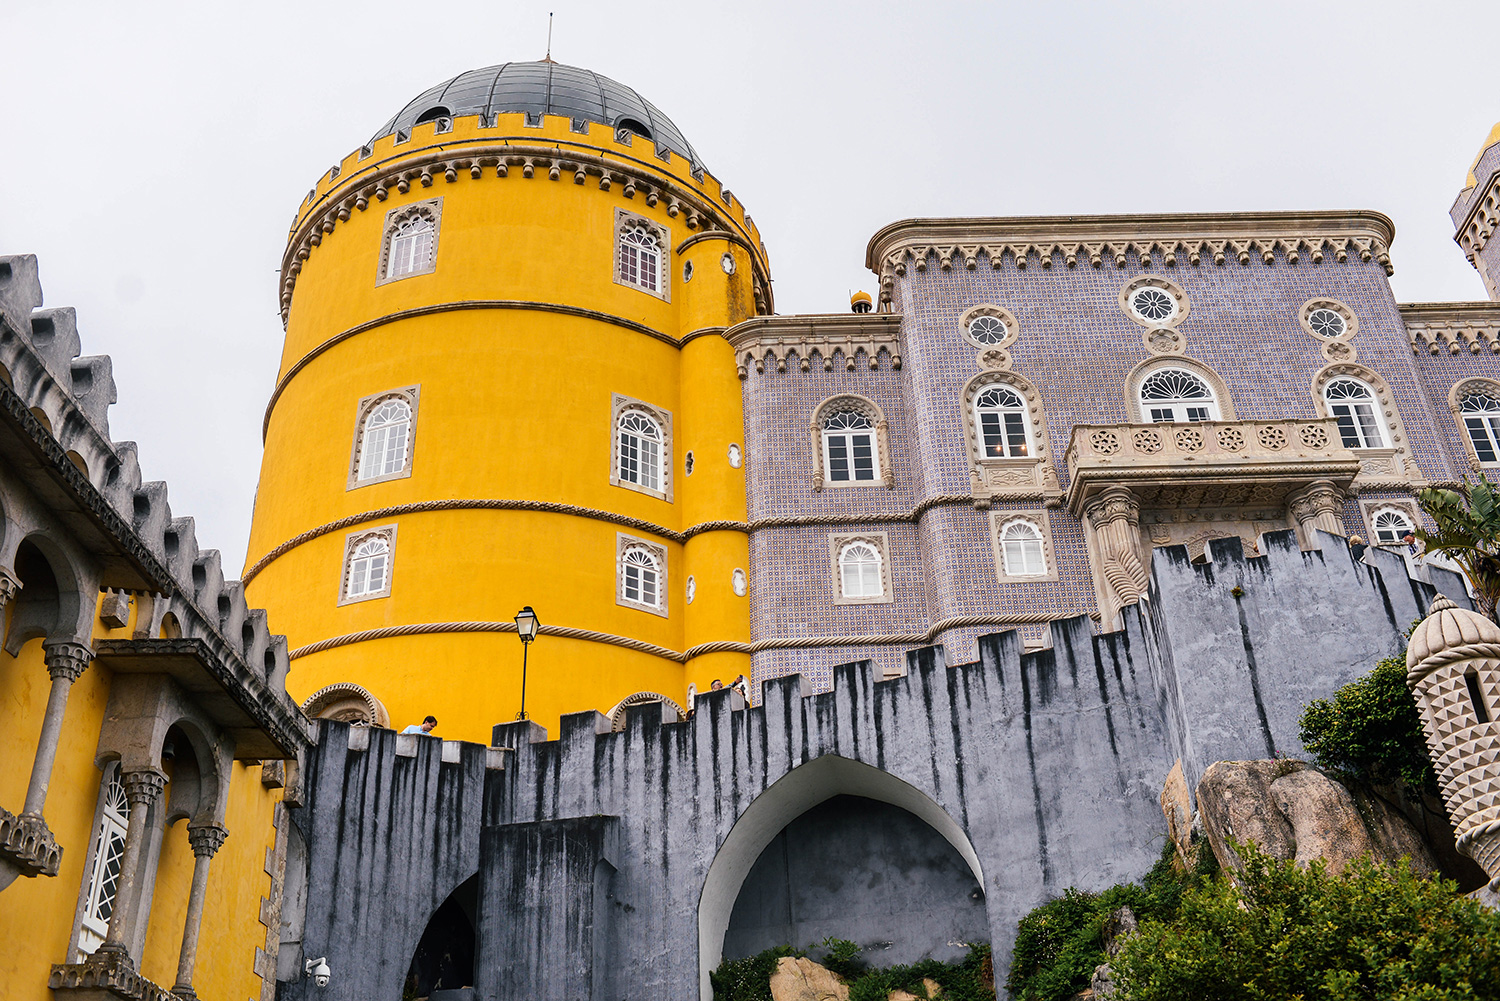 Visiting Pena Palace in Sintra, Portugal | Best Tips for an Easy Trip!